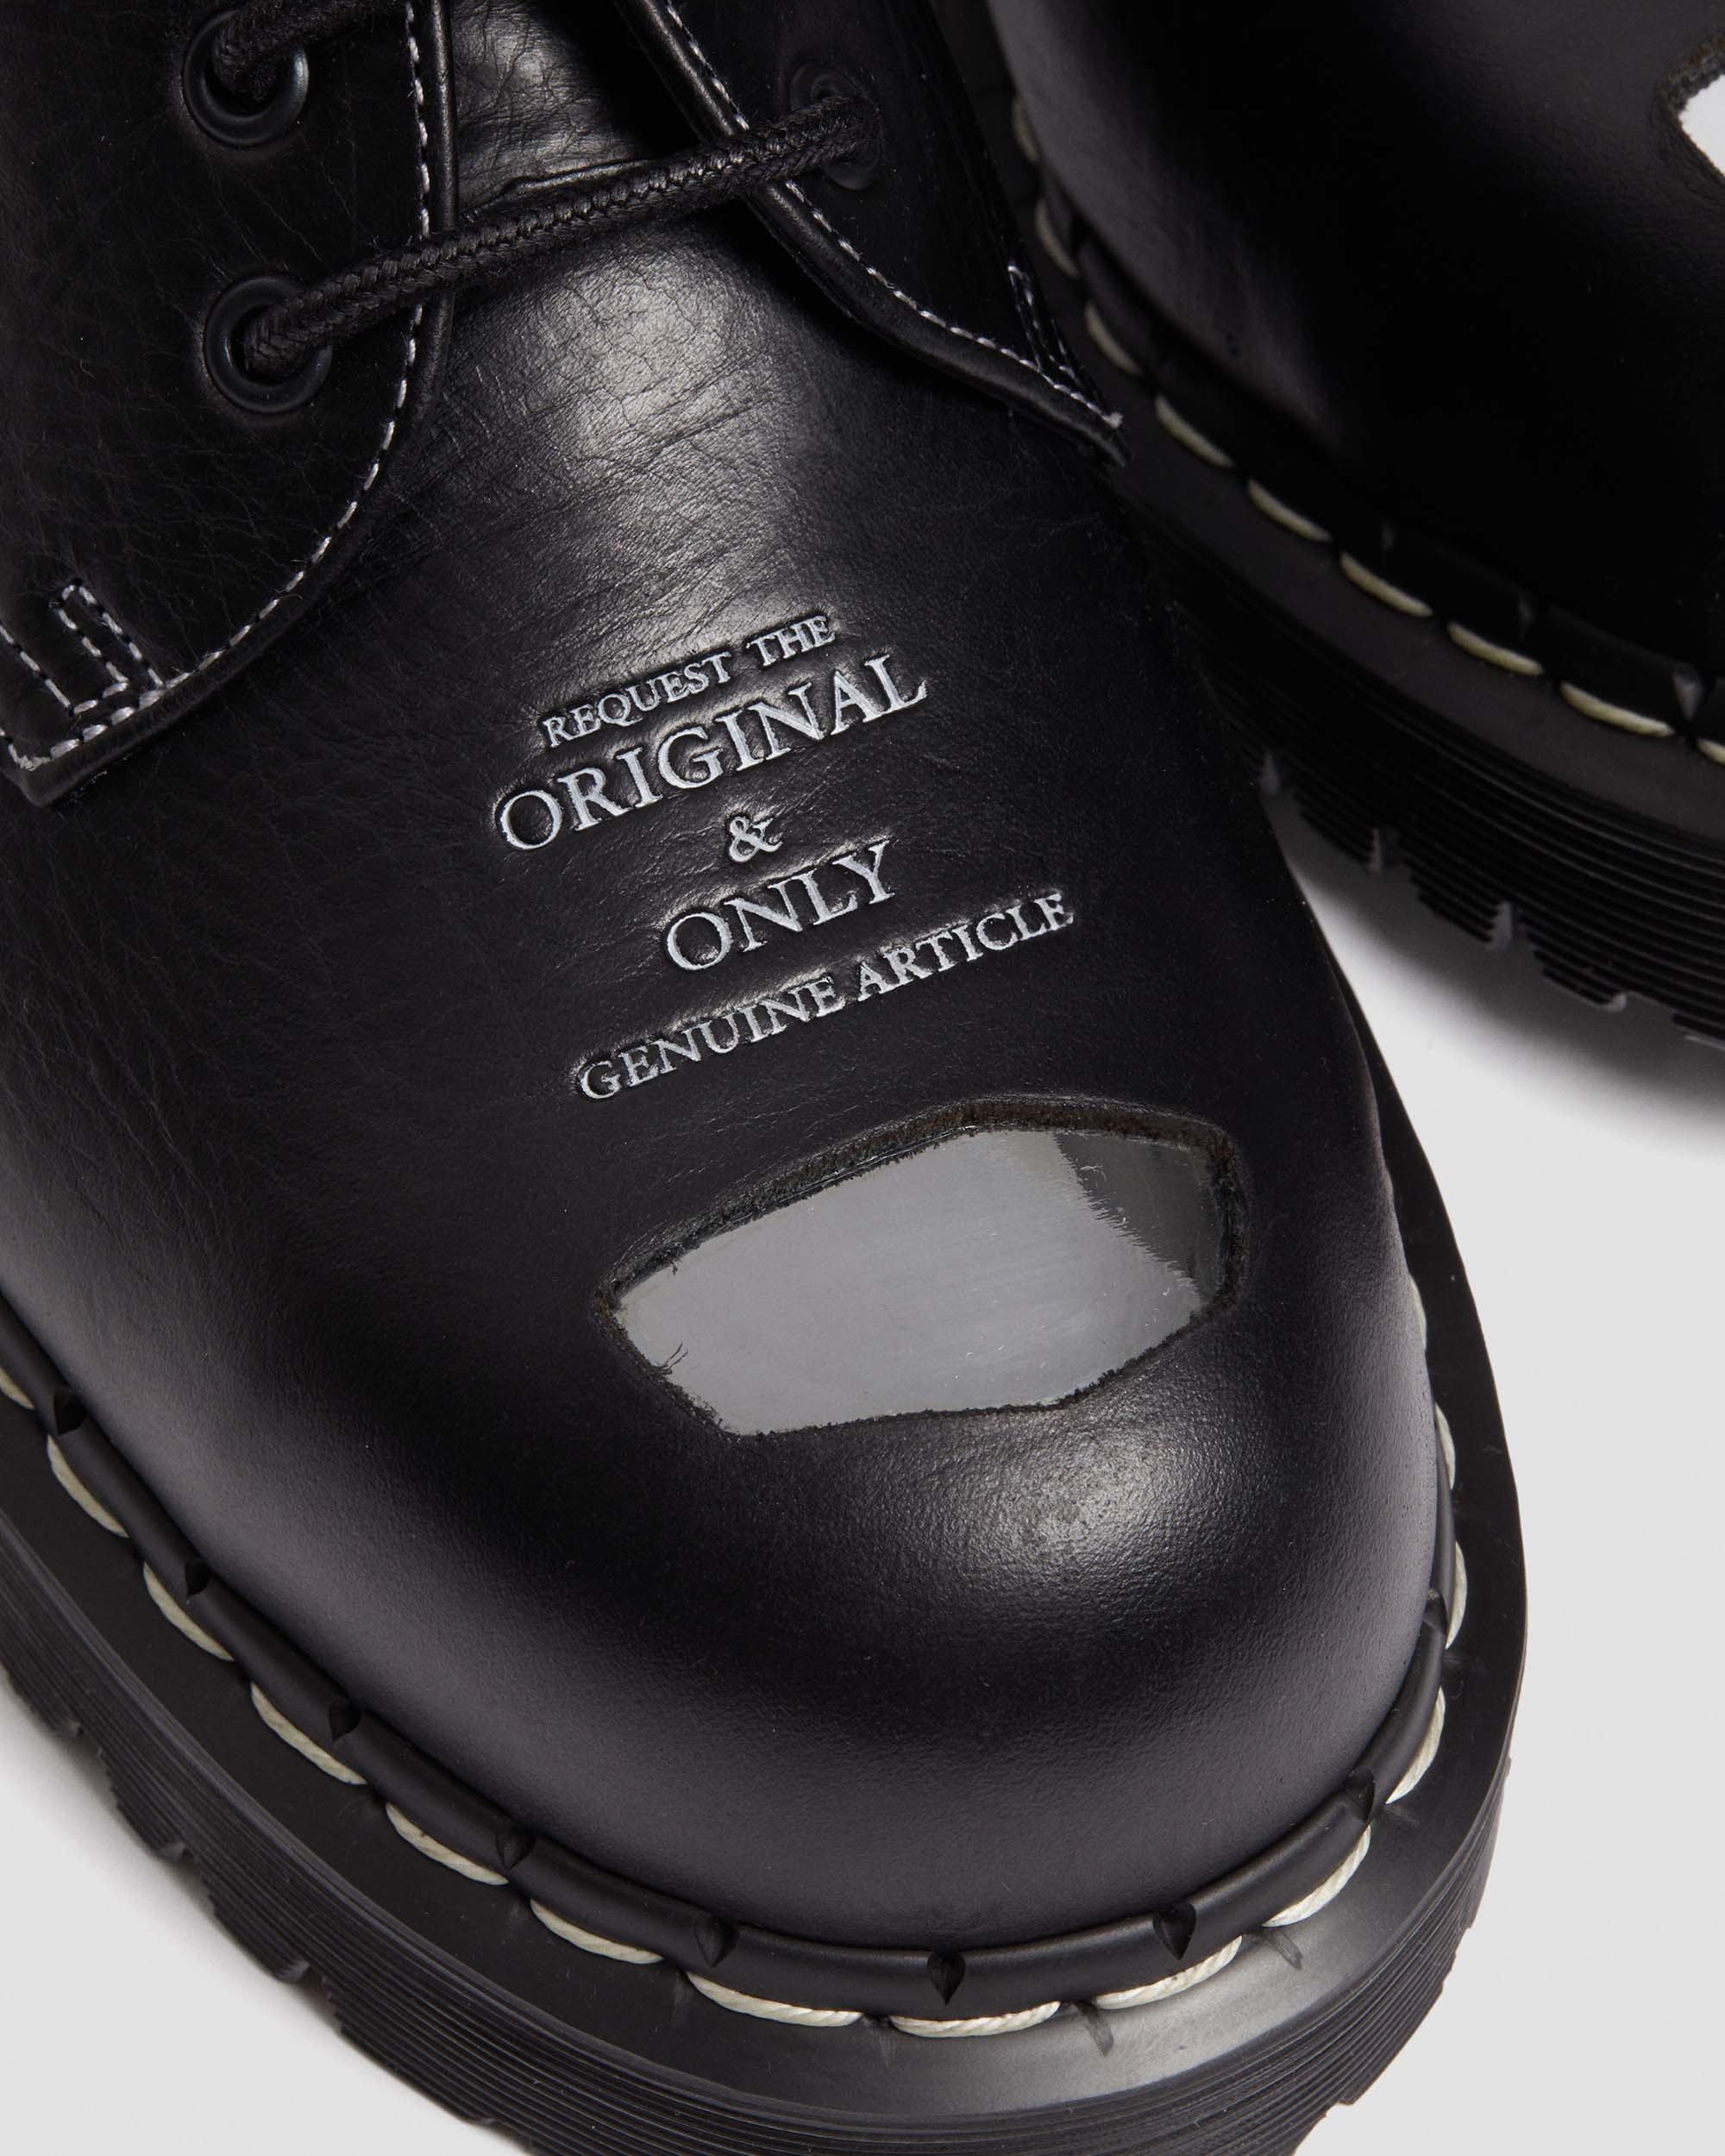 1461 Bex Exposed Steel Toe Oxford Shoes in Black